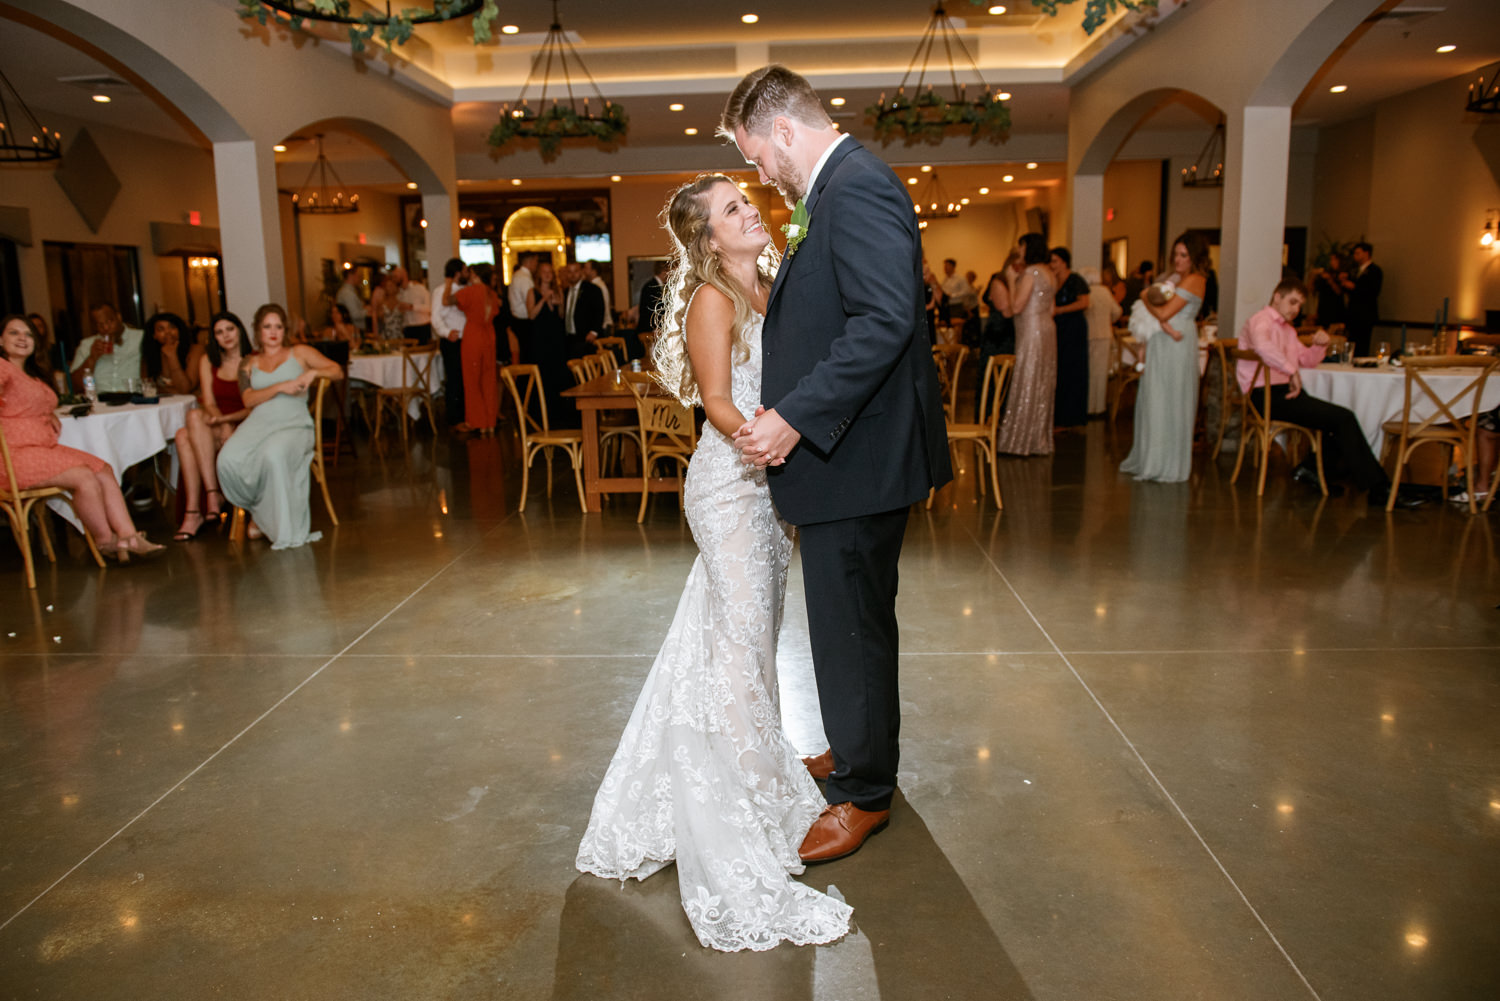 Bride and groom first dance at Missouri wedding venue Piazza Messina